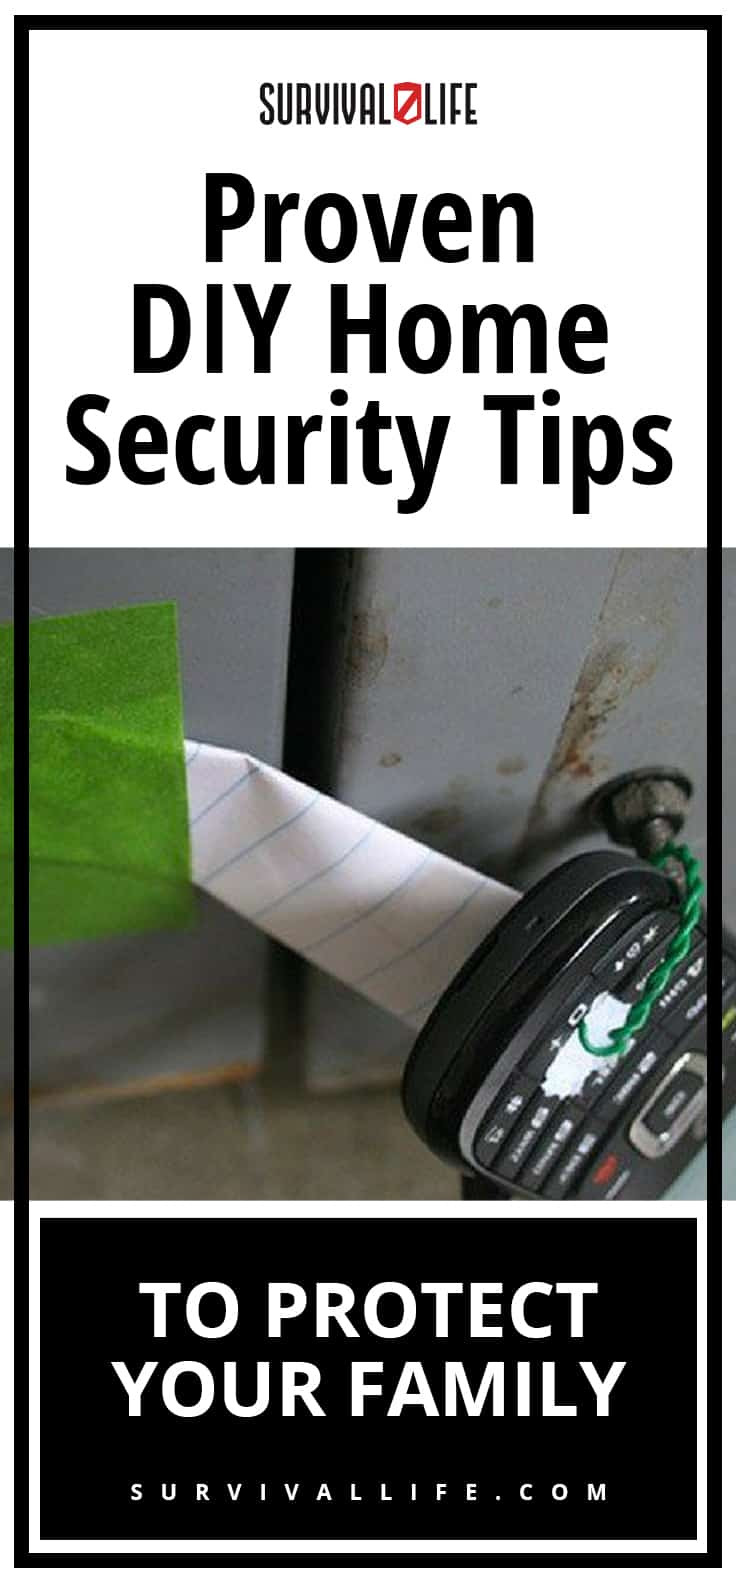 DIY Home Security Review
 DIY Home Security Ideas for Preppers